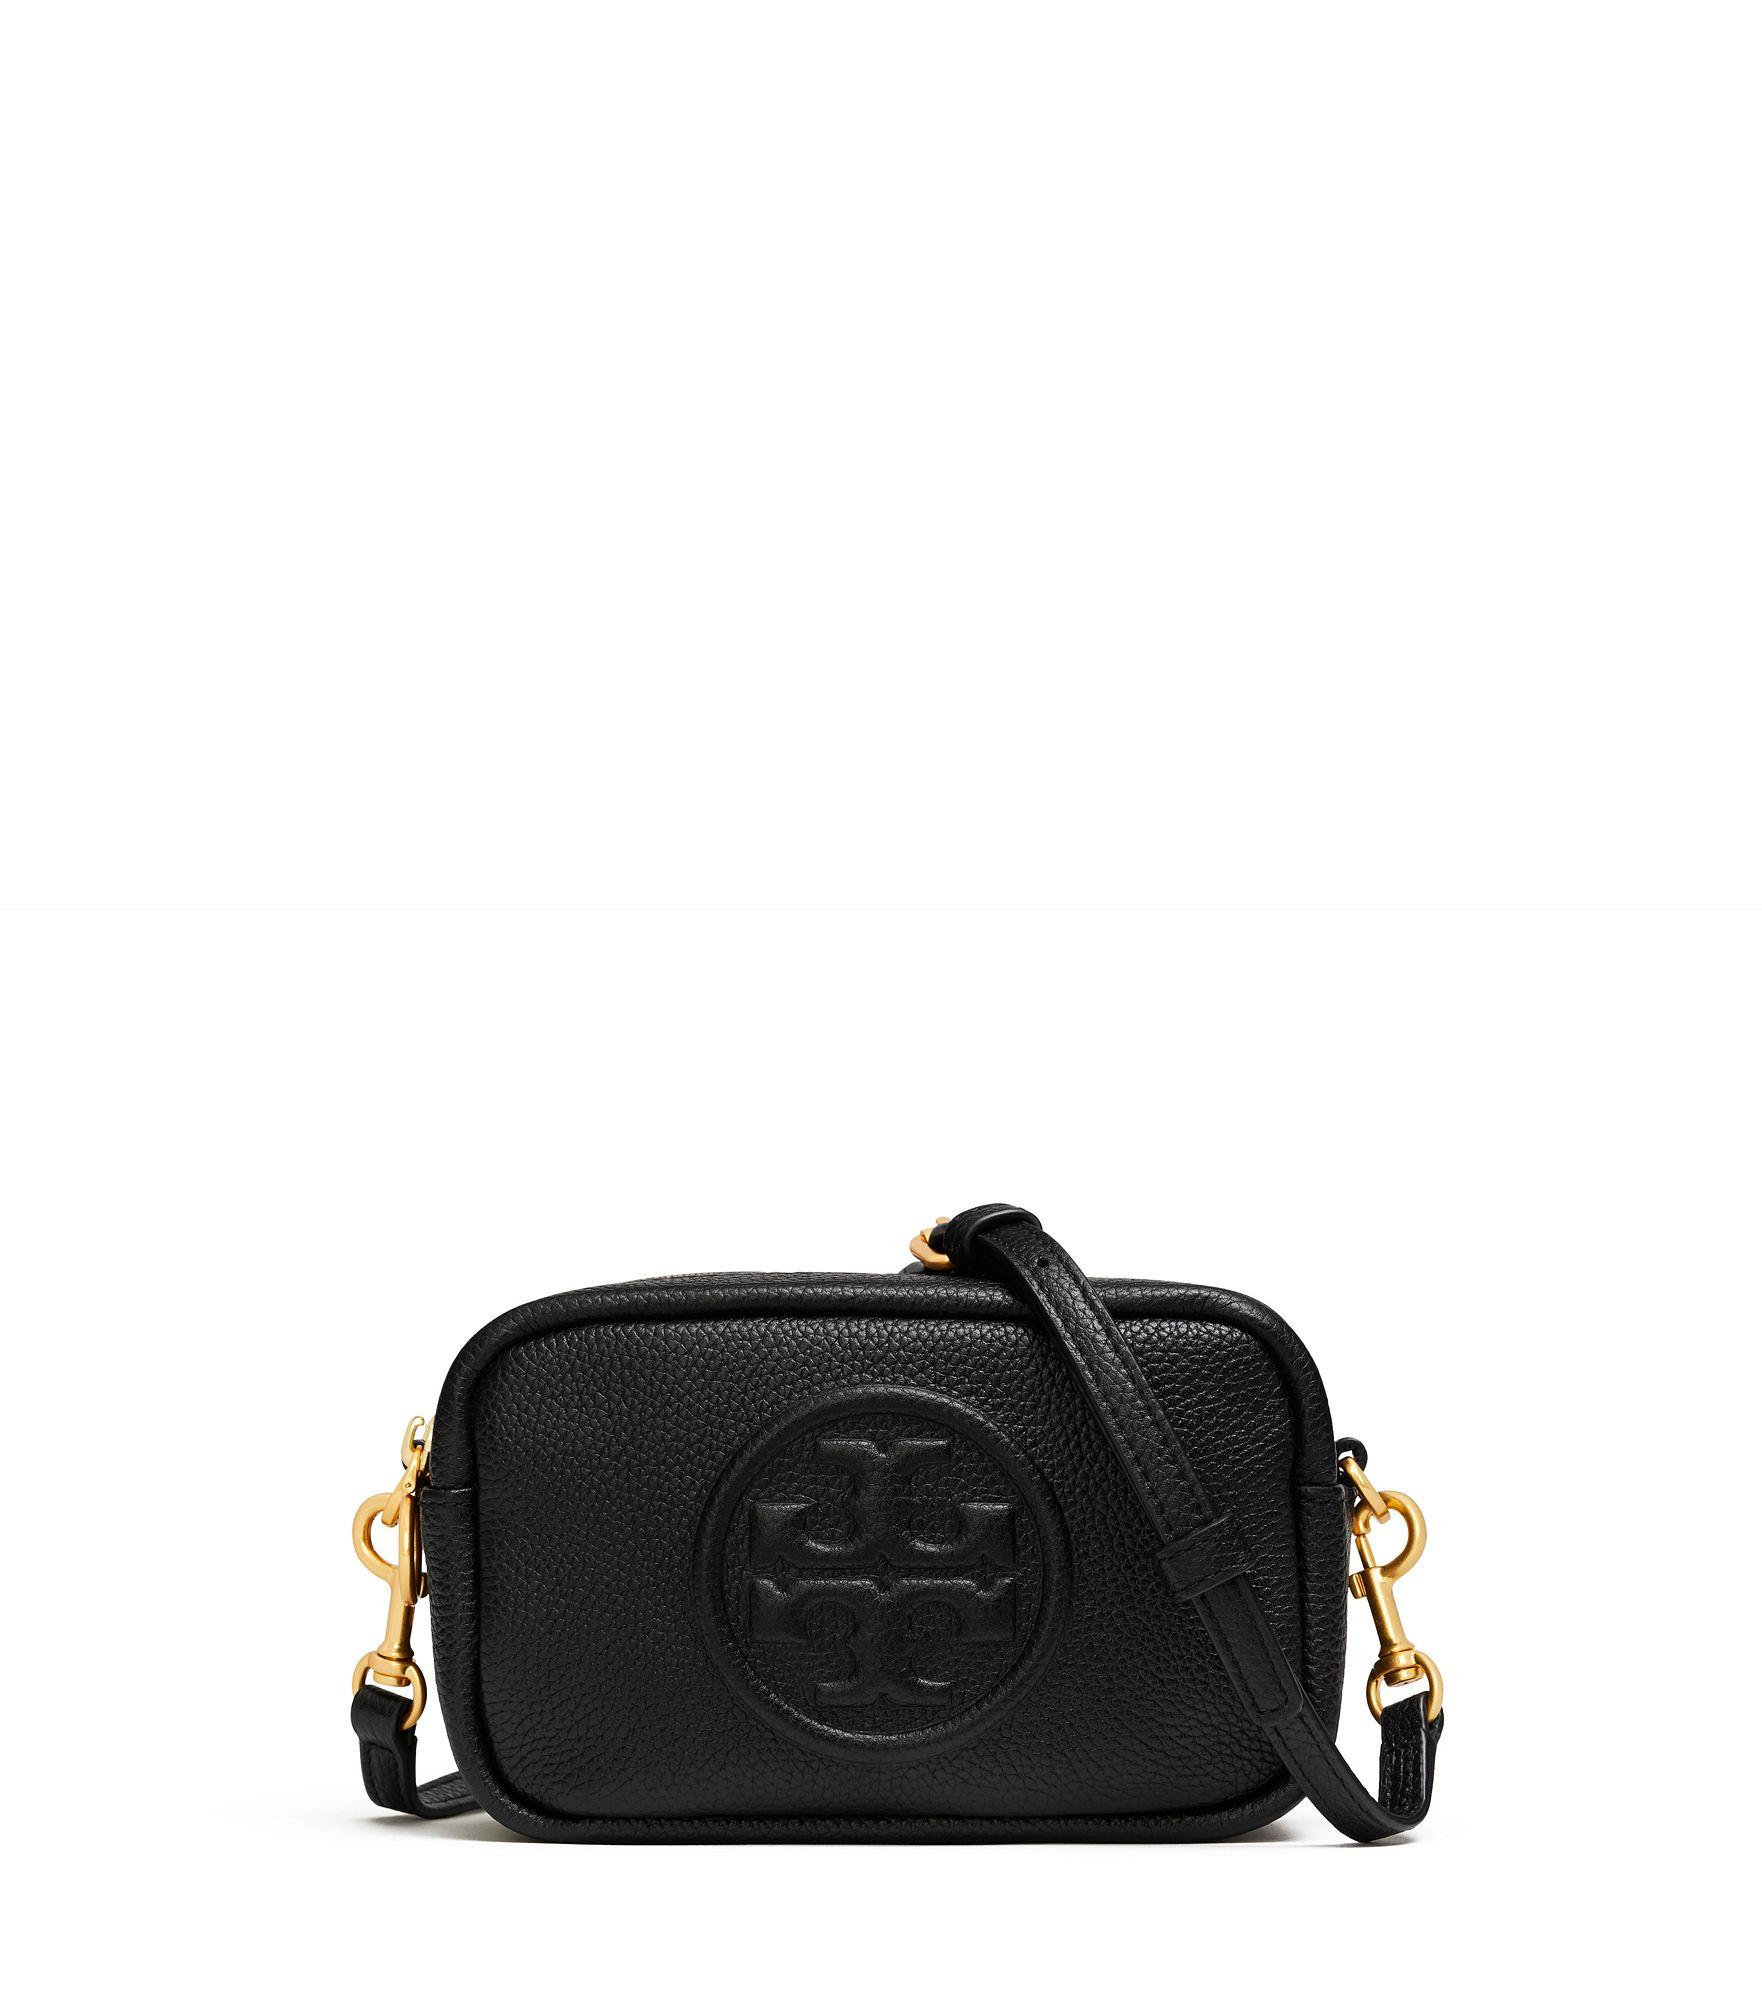 Tory Burch Leather Perry Bombe Mini Bag in Black - Lyst